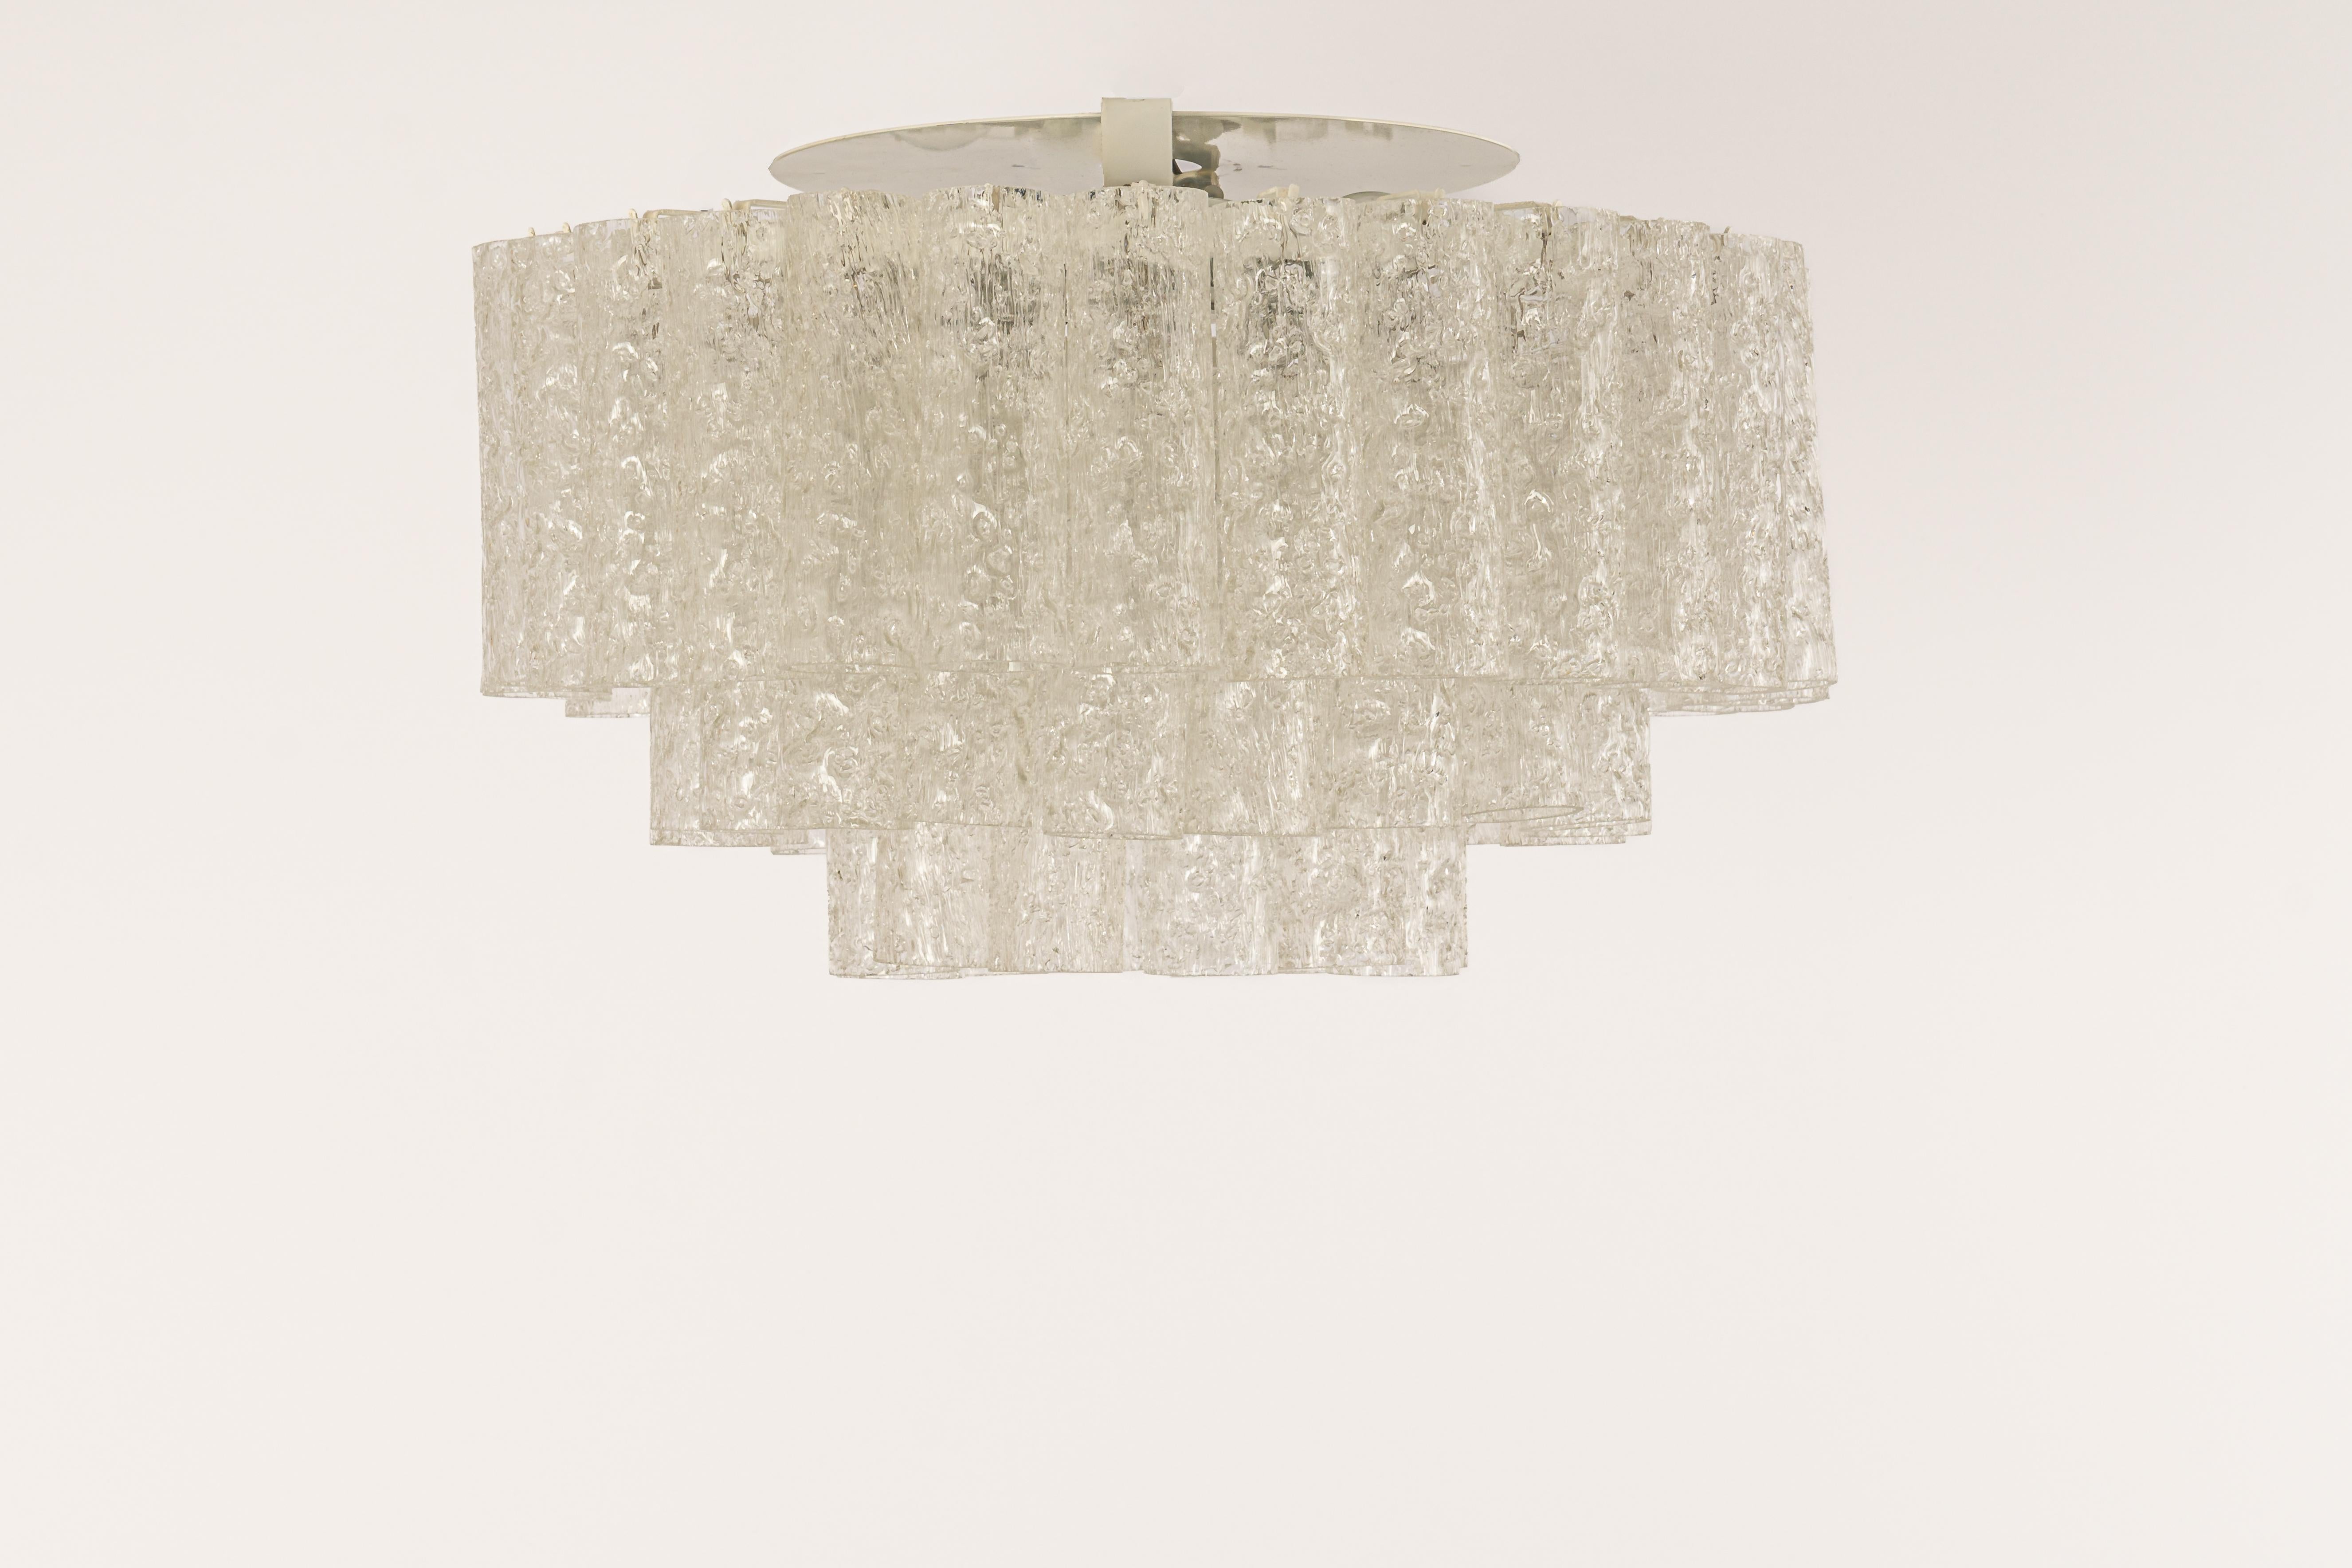 Fantastic three-tier midcentury chandelier by Doria, Germany, manufactured circa 1960-1969. 3 rings of Murano glass cylinders suspended from a fixture.

Sockets: 4 x E14 candelabra bulbs (up to 40 W each) + 1 x E27 Standard
Light bulbs are not